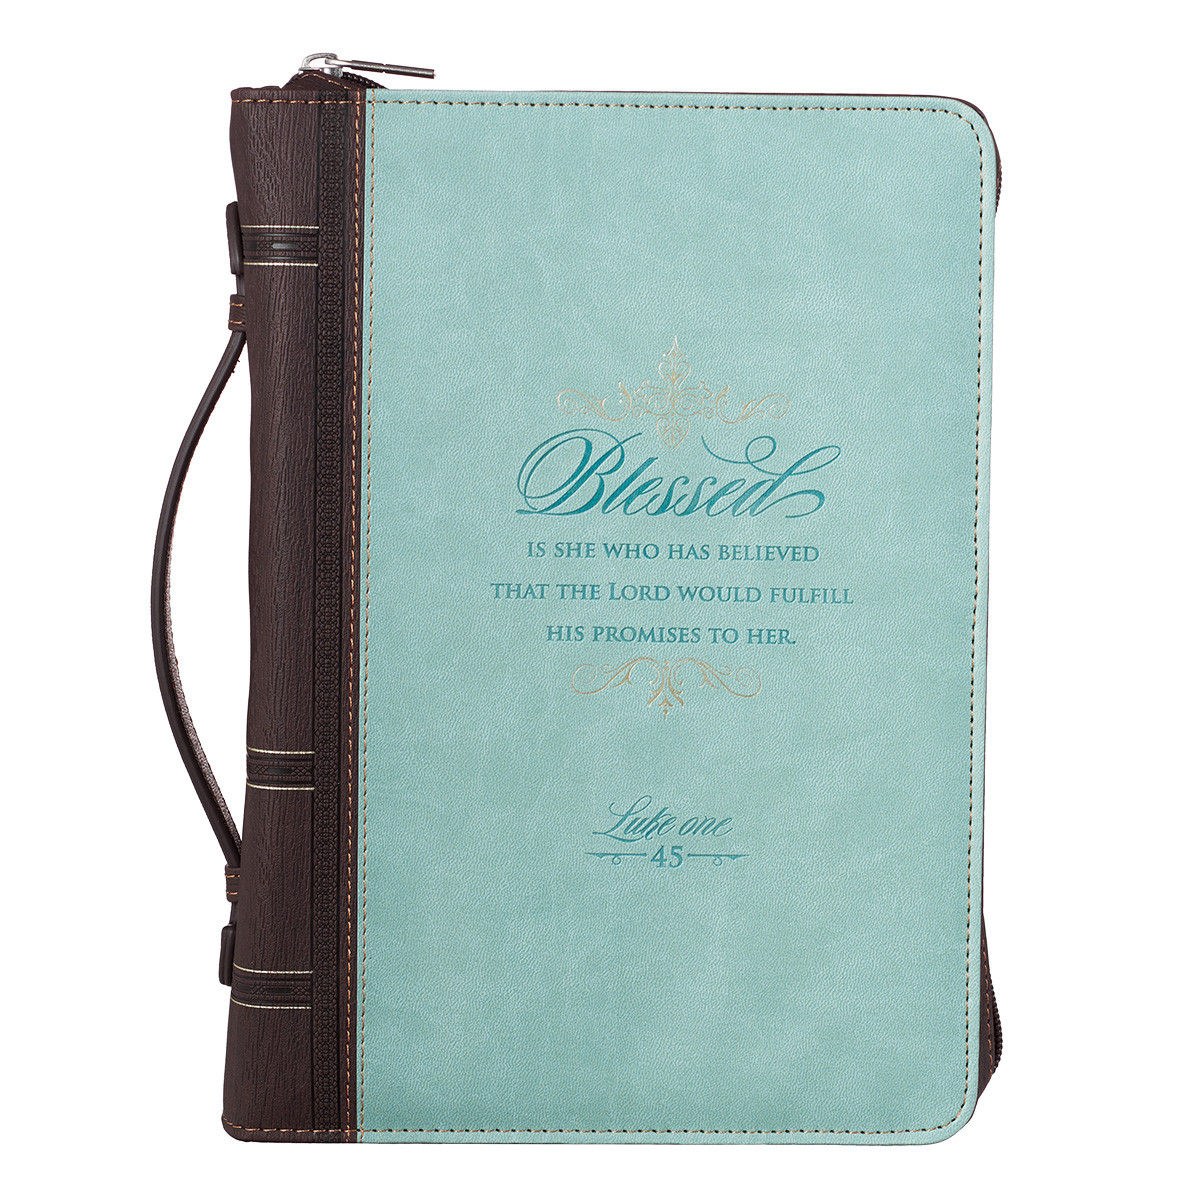 Blessed Light Blue Faux Leather Bible Cover